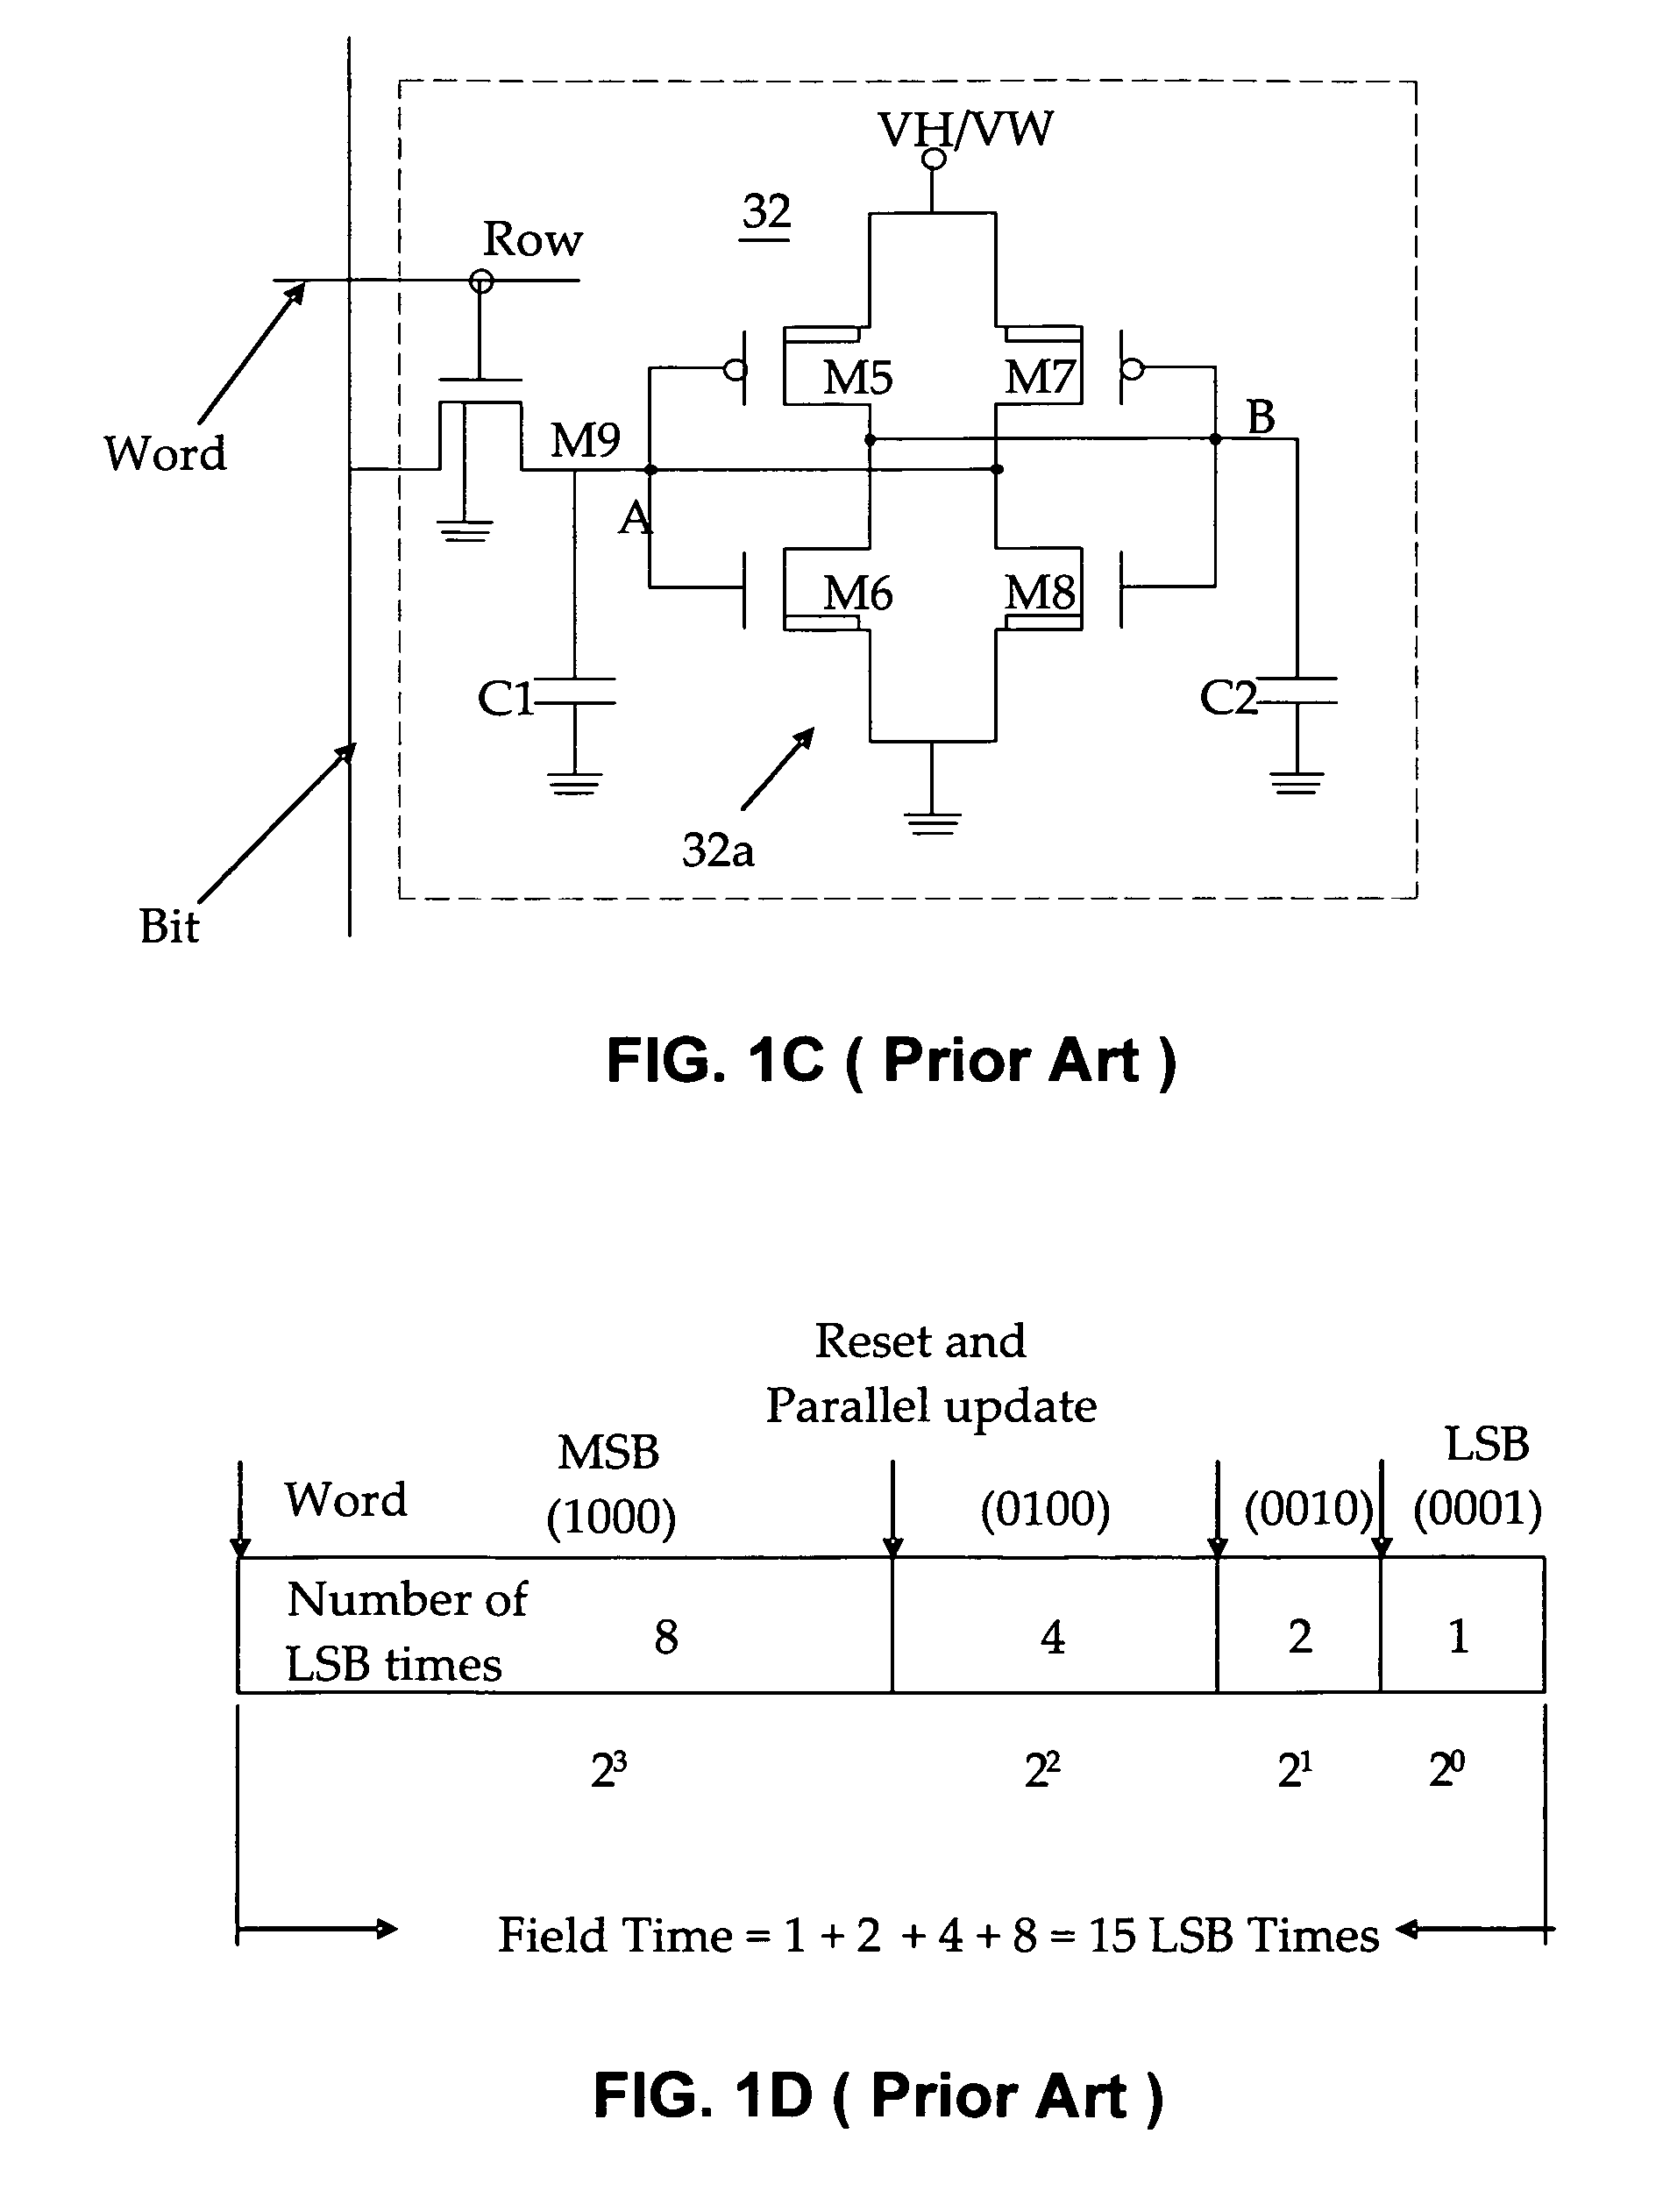 Projection apparatus using variable light source